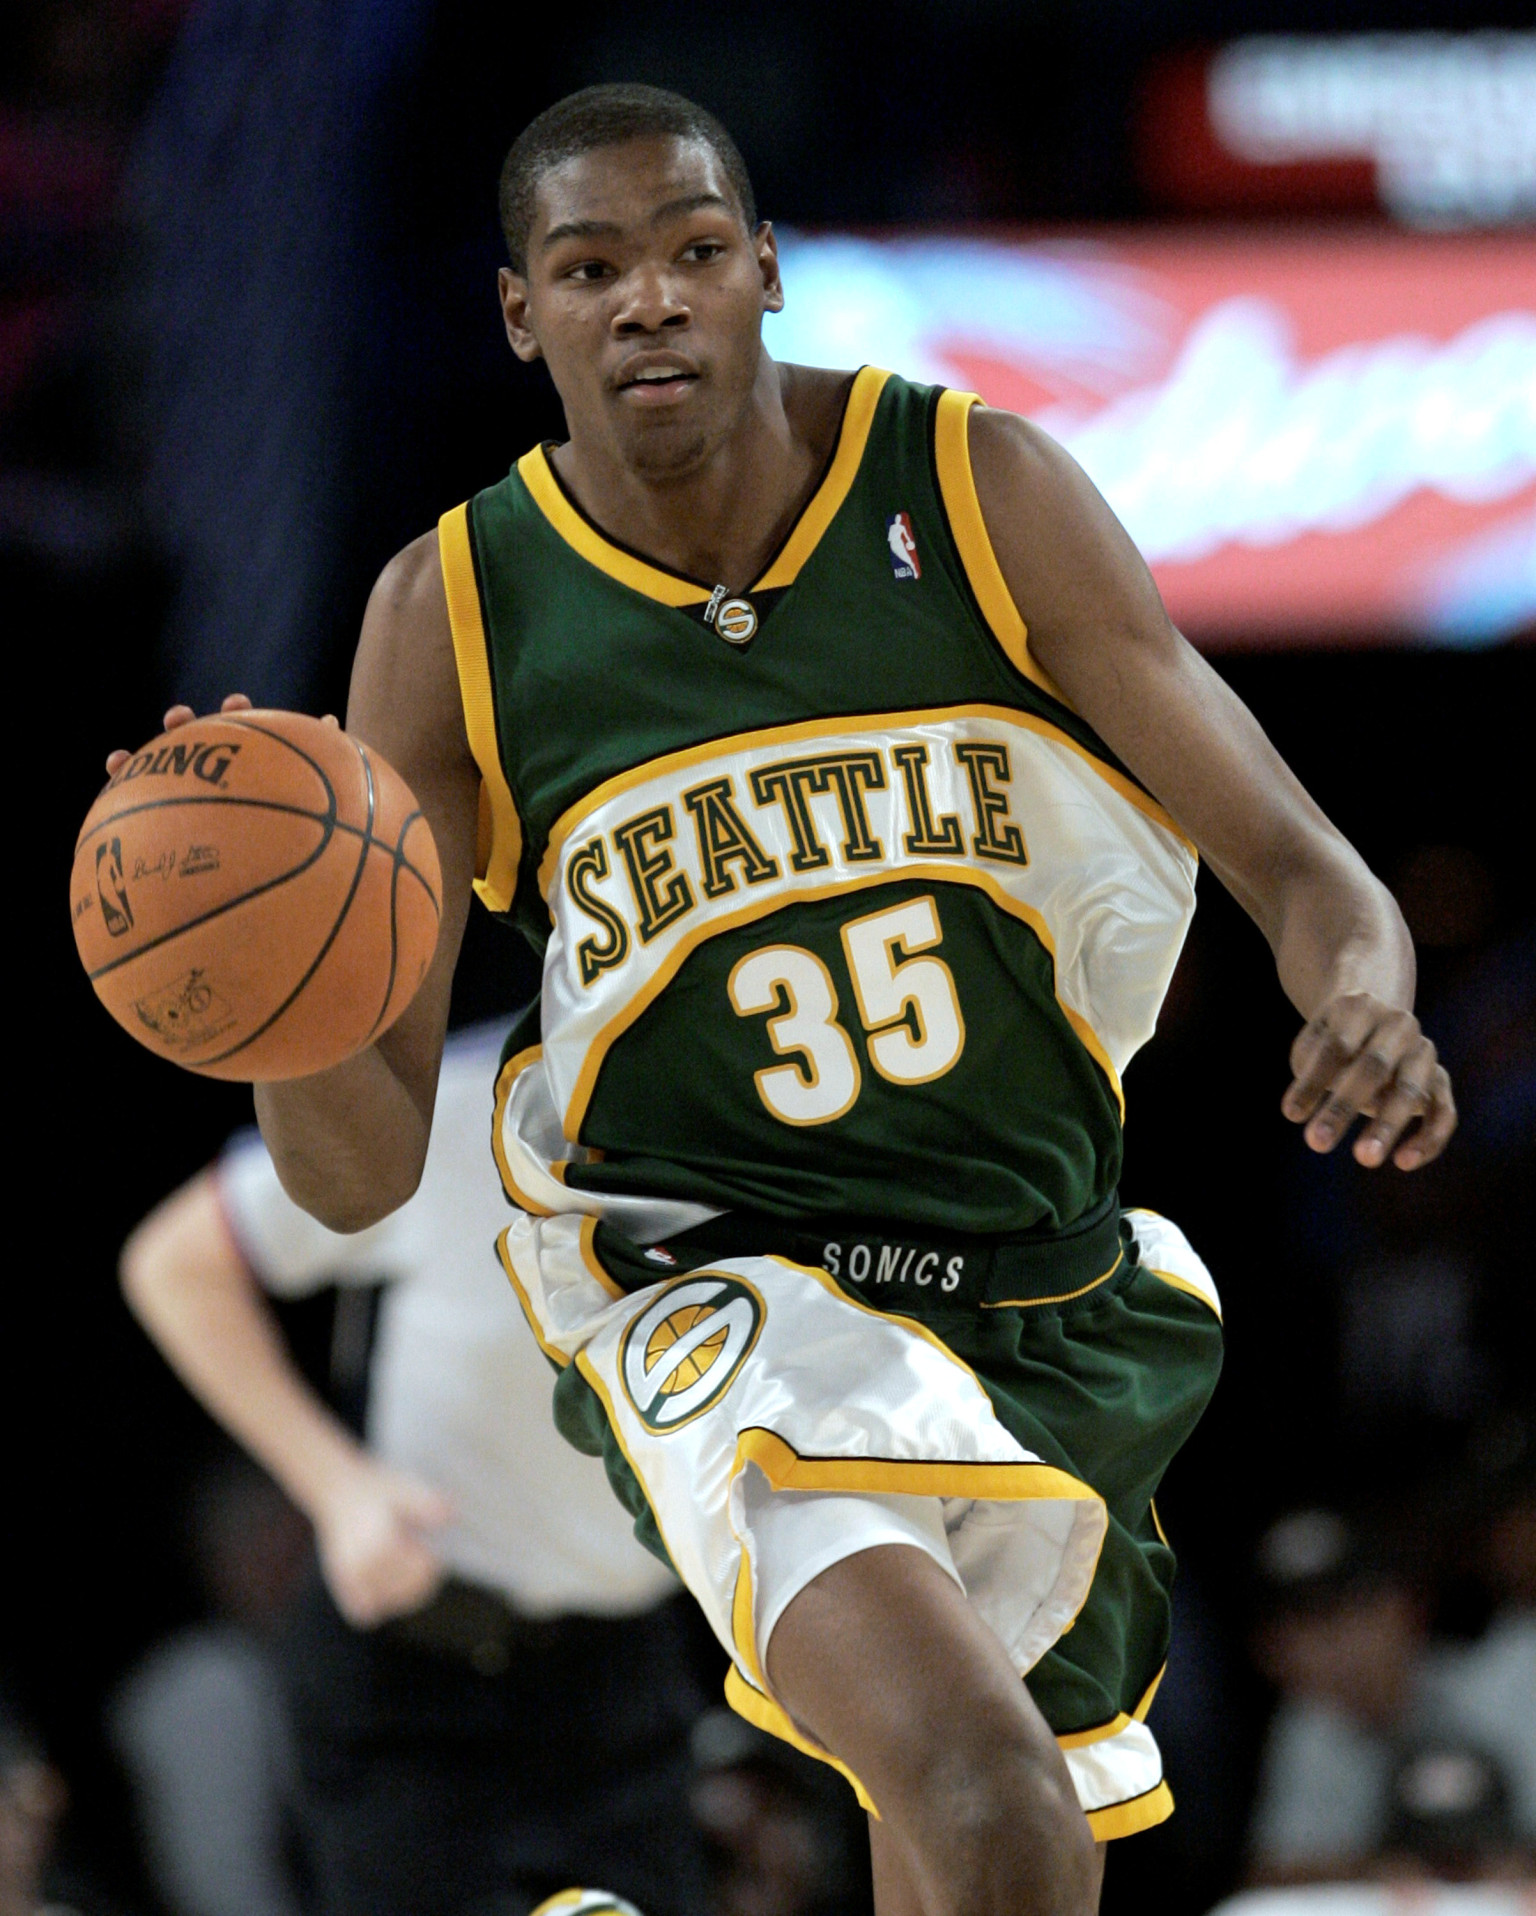 The NBA will reportedly return to Seattle for an exhibition game featuring  former SuperSonic Kevin Durant